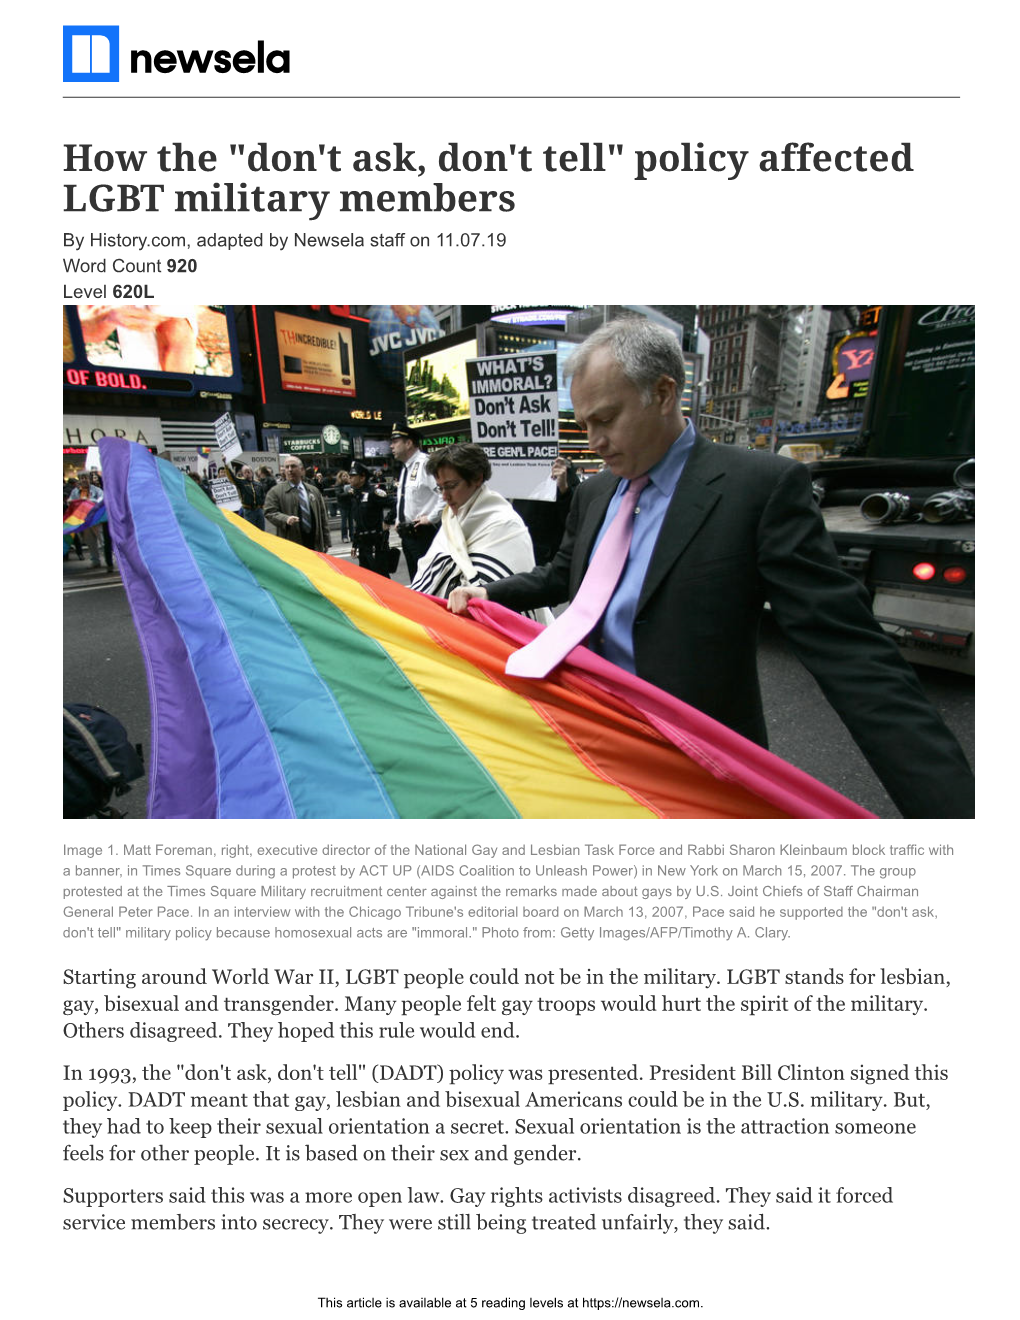 Policy Affected LGBT Military Members by History.Com, Adapted by Newsela Staff on 11.07.19 Word Count 920 Level 620L